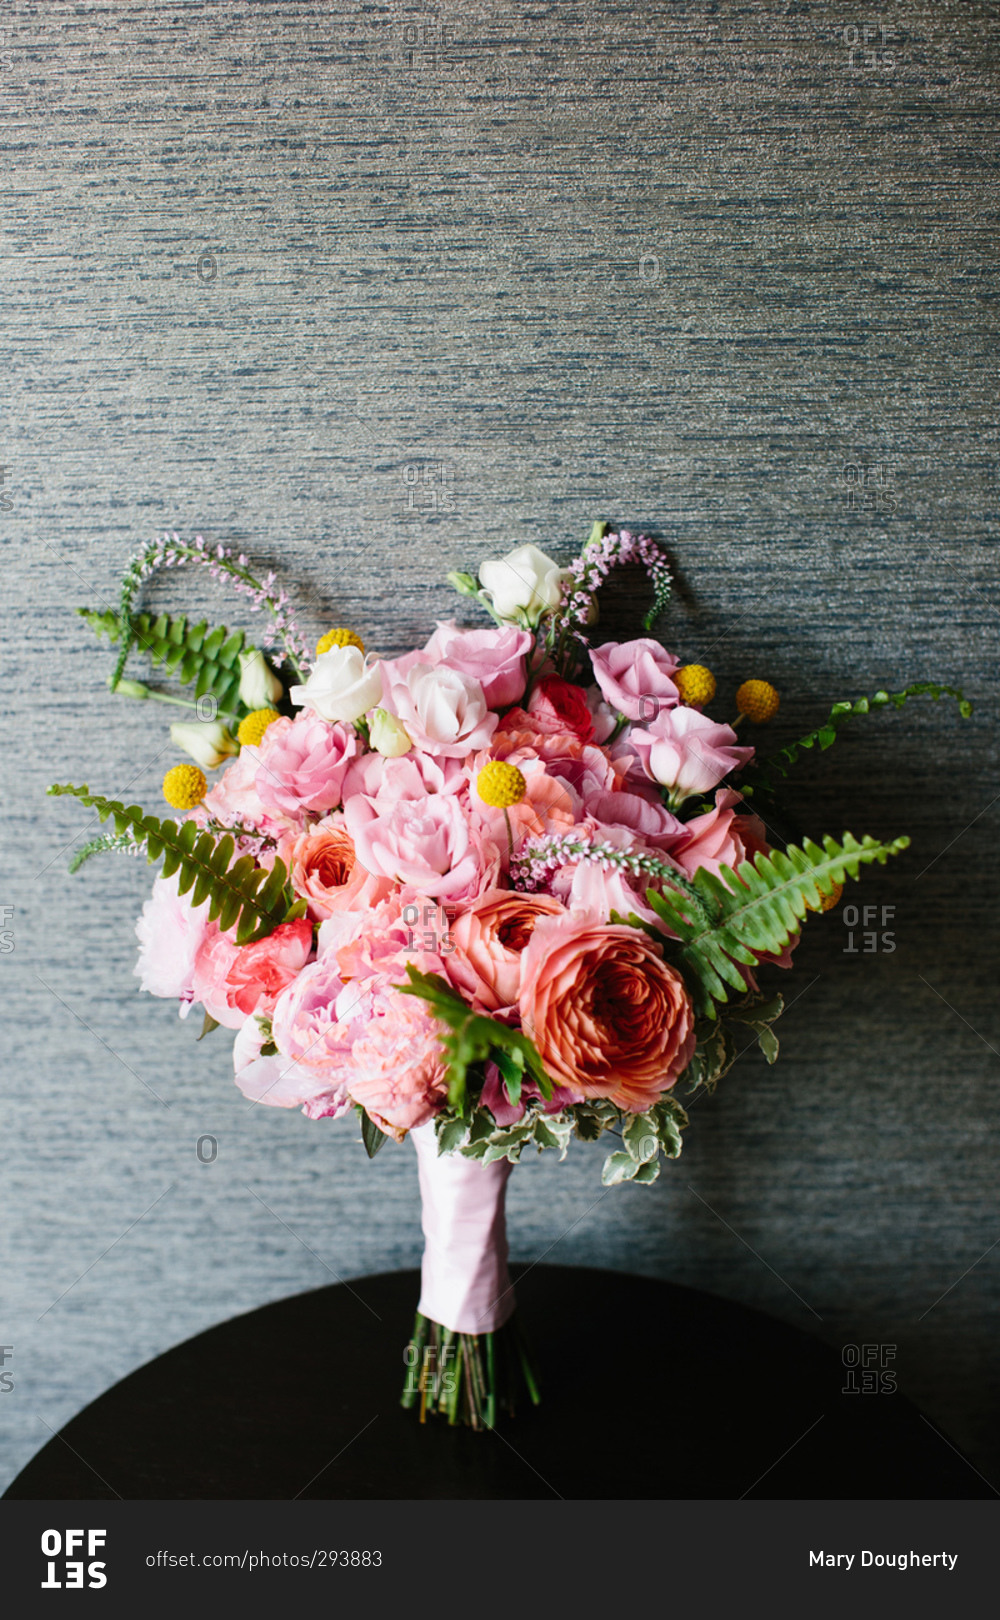 Bride's bouquet with pink roses and peonies